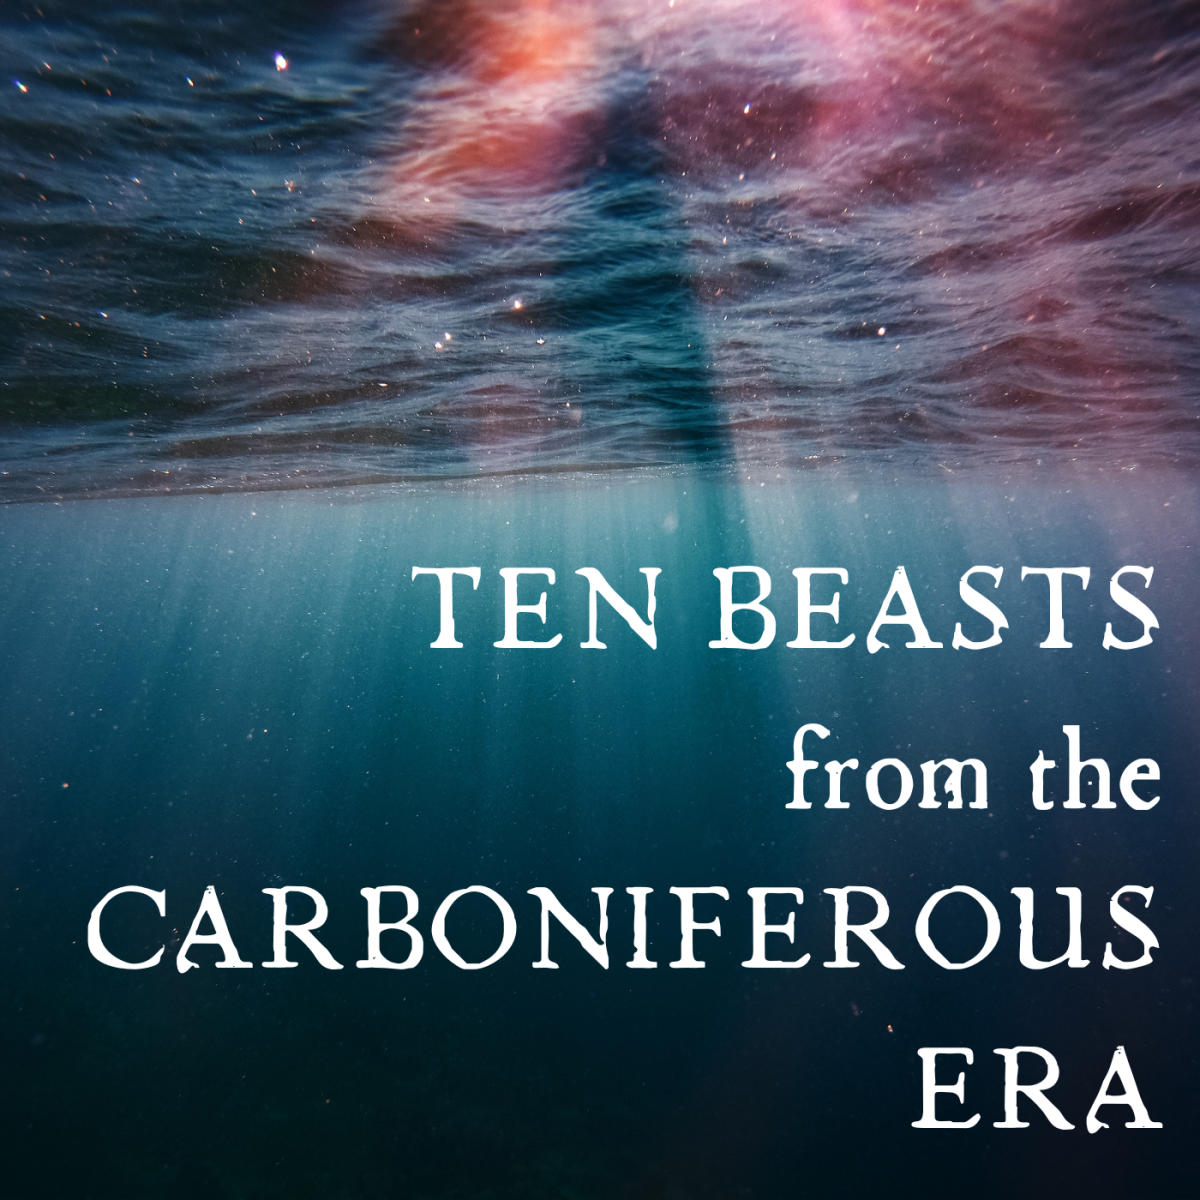 10 Bizarre Beasts That Roamed the Carboniferous Waters